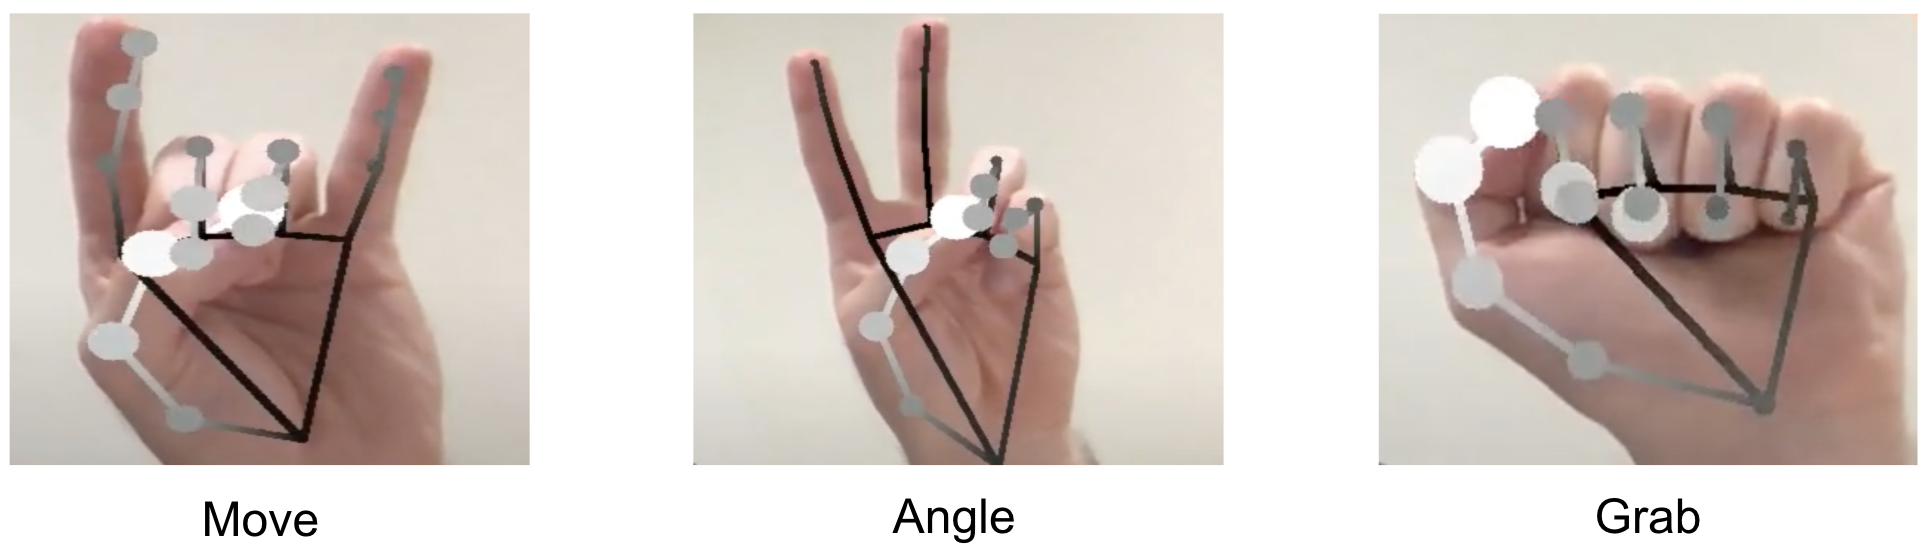 Figure 4: Gesture classes recognized by our model (“no gesture” class is not shown).